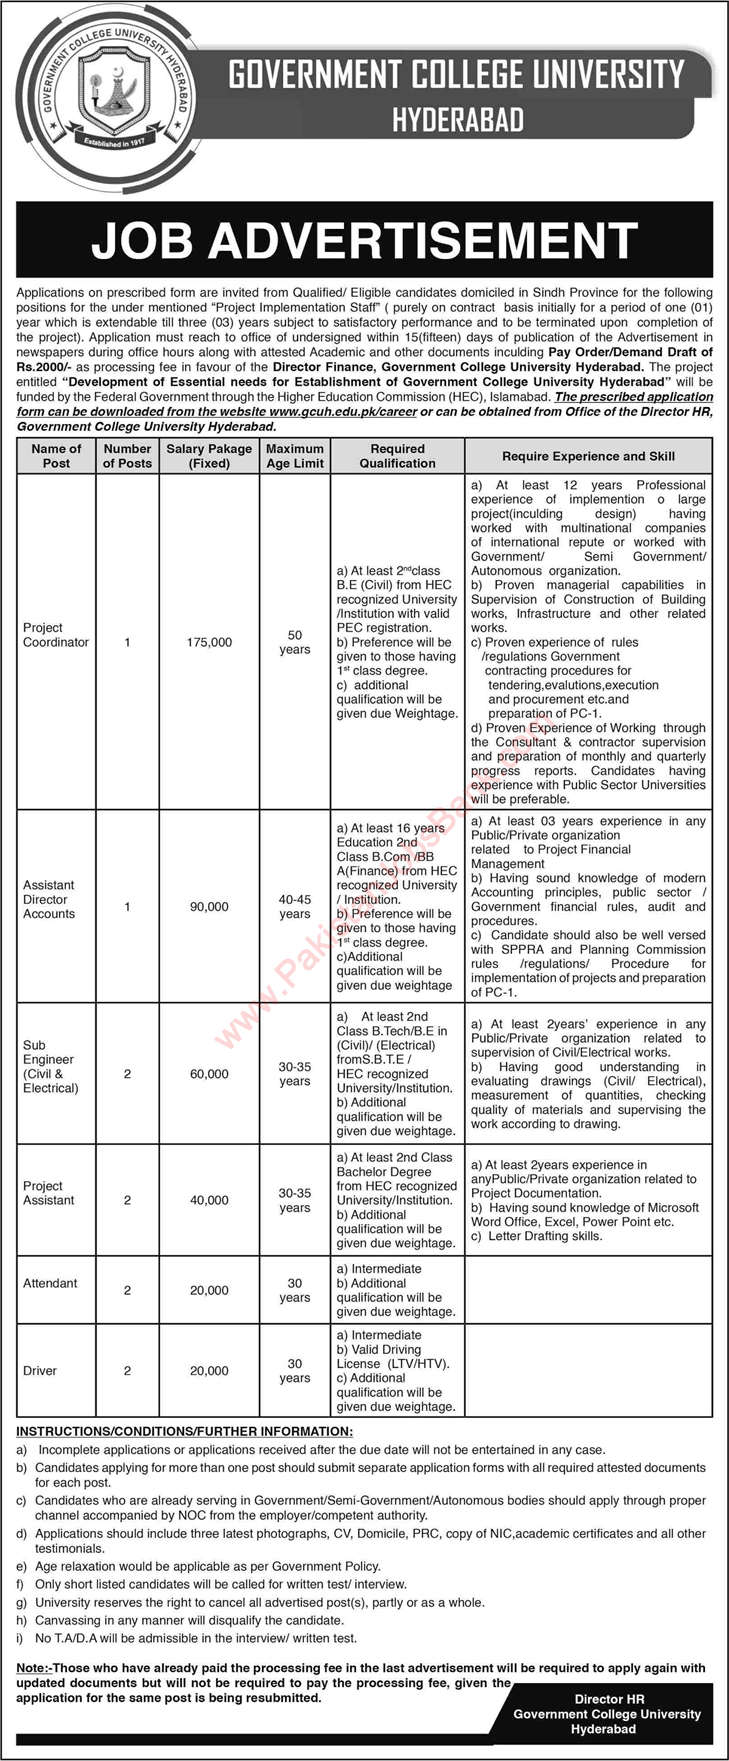 Government College University Hyderabad Jobs October 2021 GCU Application Form Sub Engineers & Others Latest